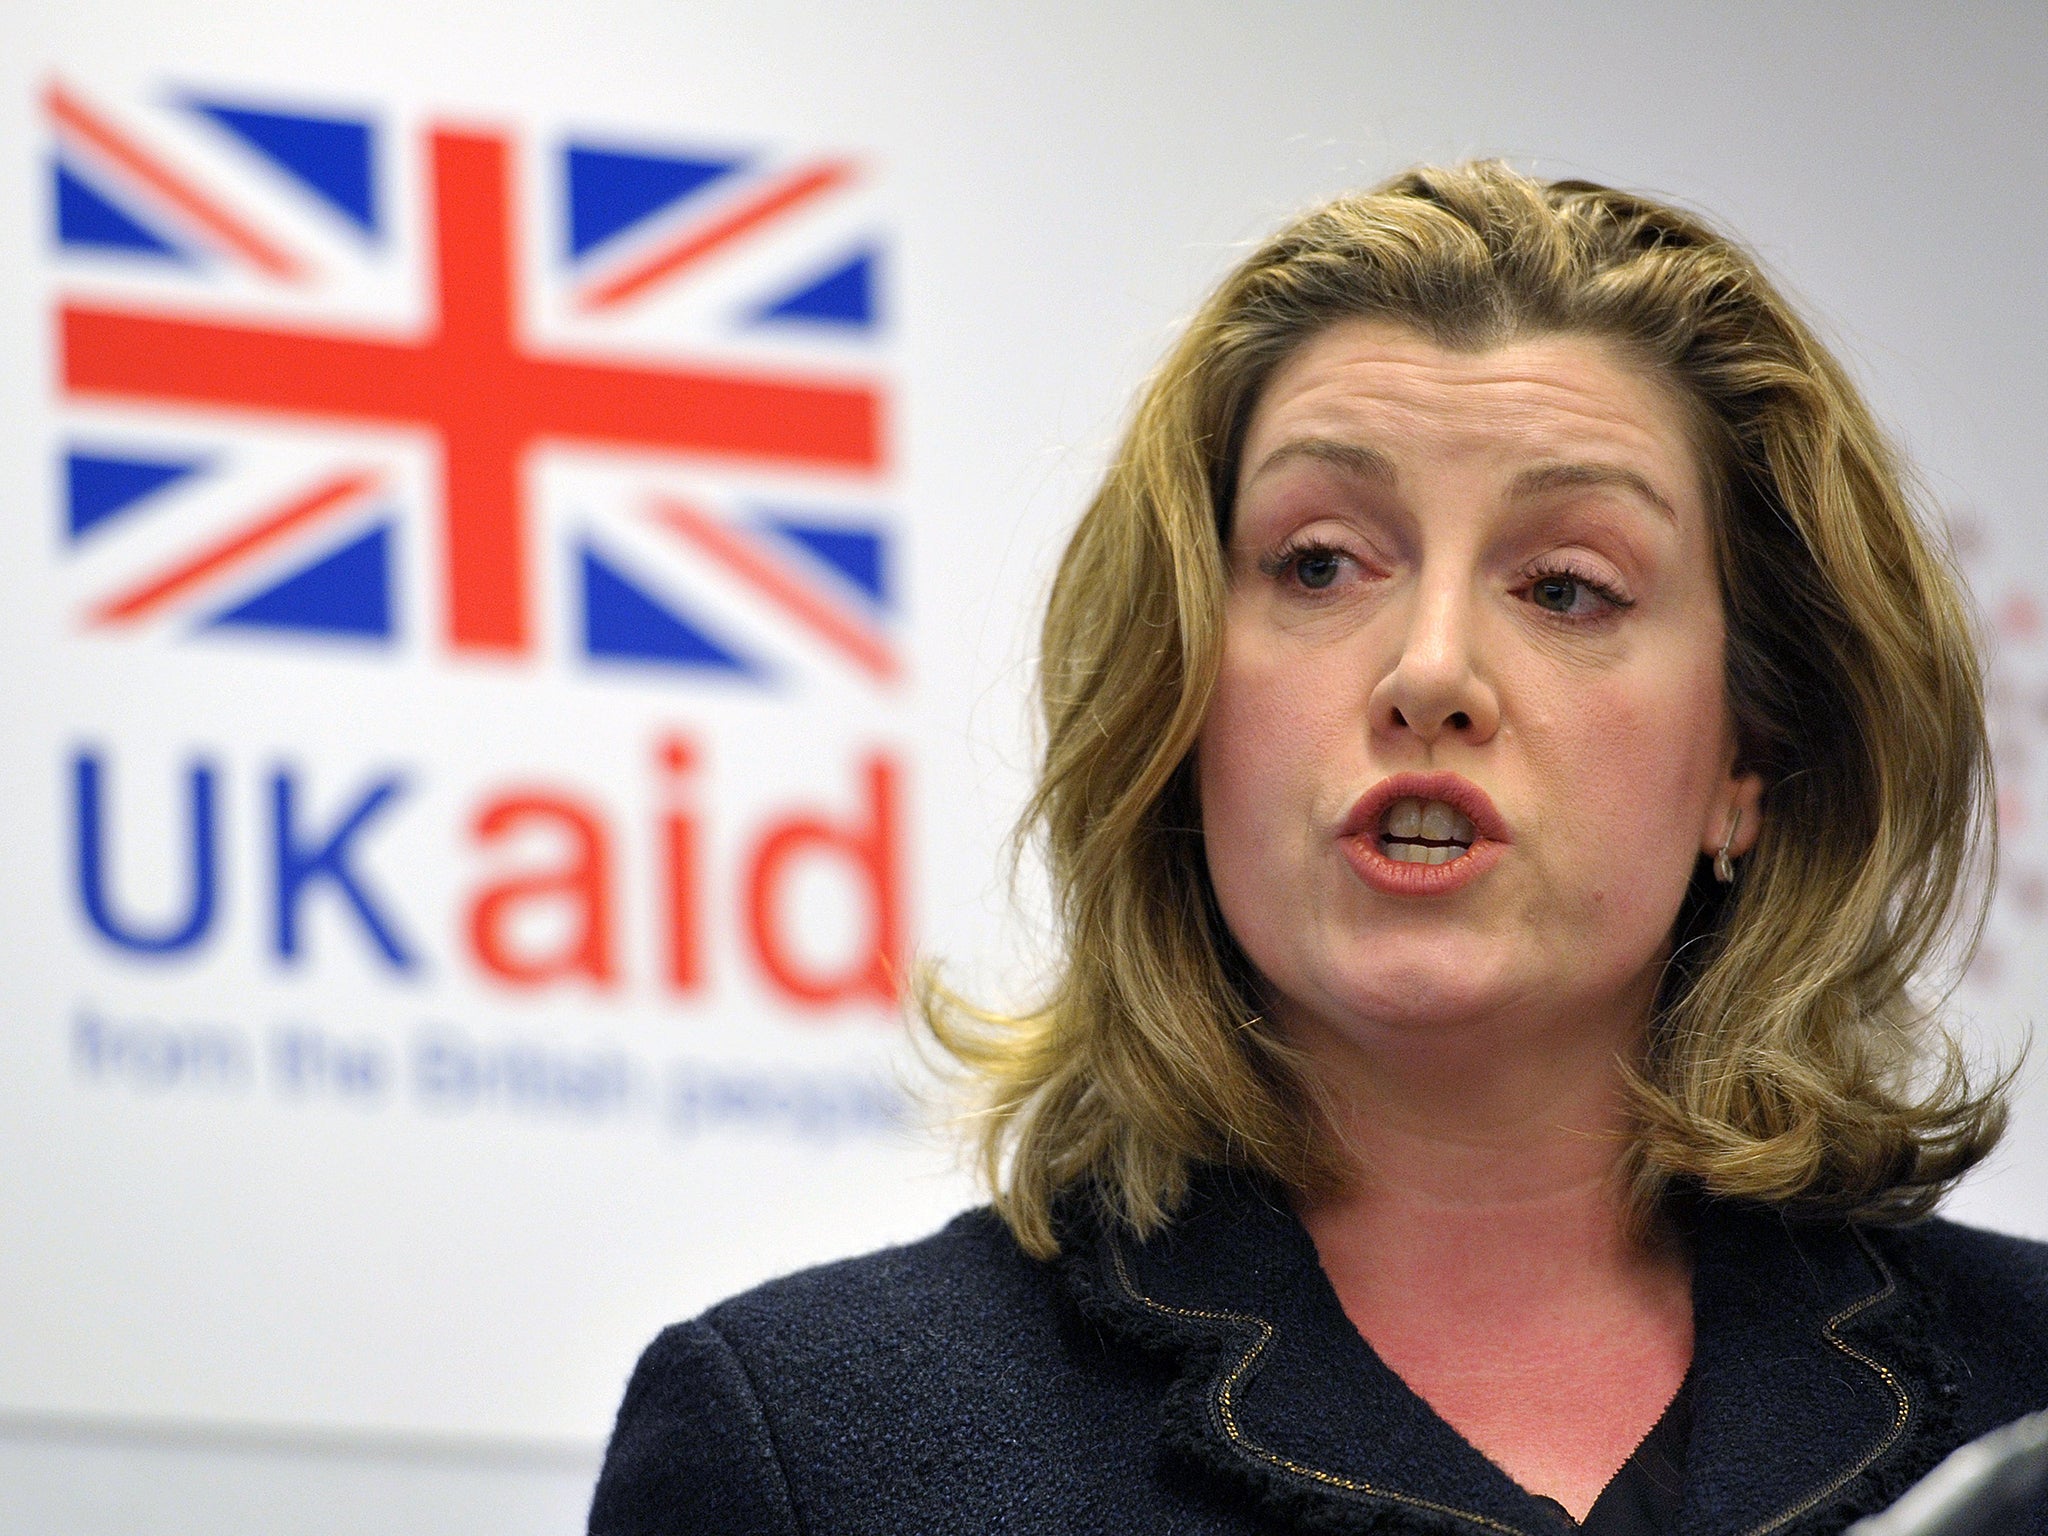 Aid will stop developing countries can fund themselves, by 'putting their hands in their pockets, Penny Mordaunt vowed